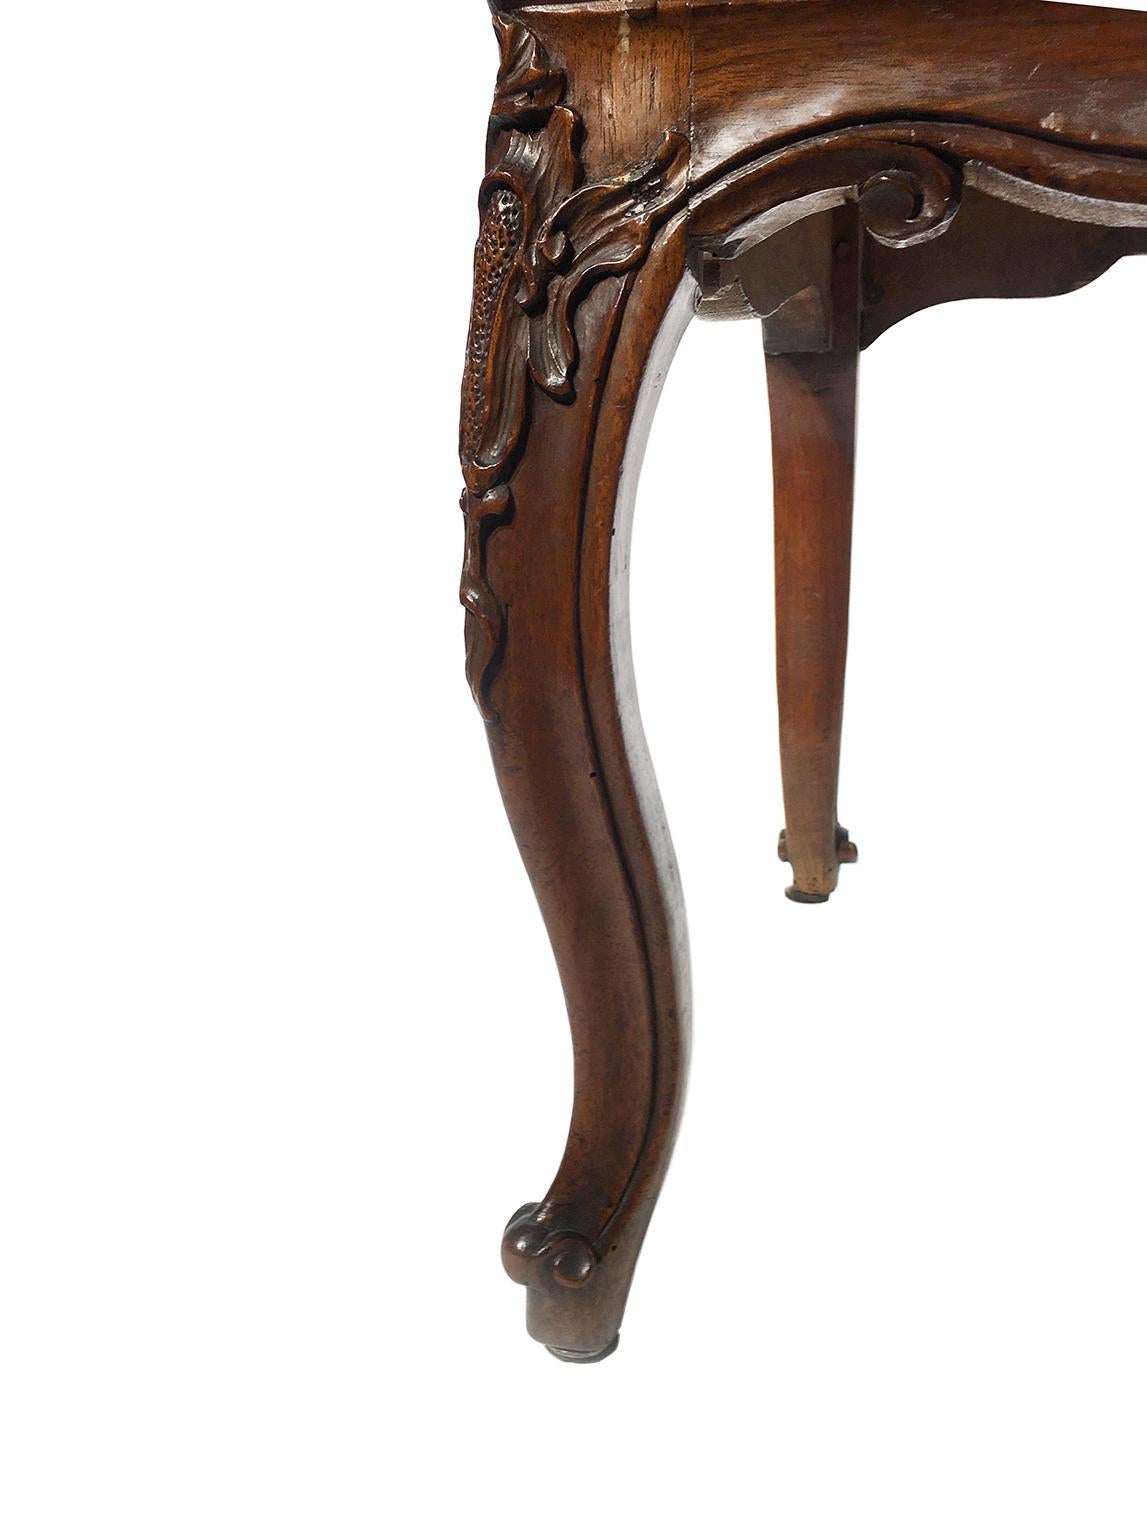 Italian Carved Walnut Chairs with Leather Covers, Milan, circa 1750 For Sale 11